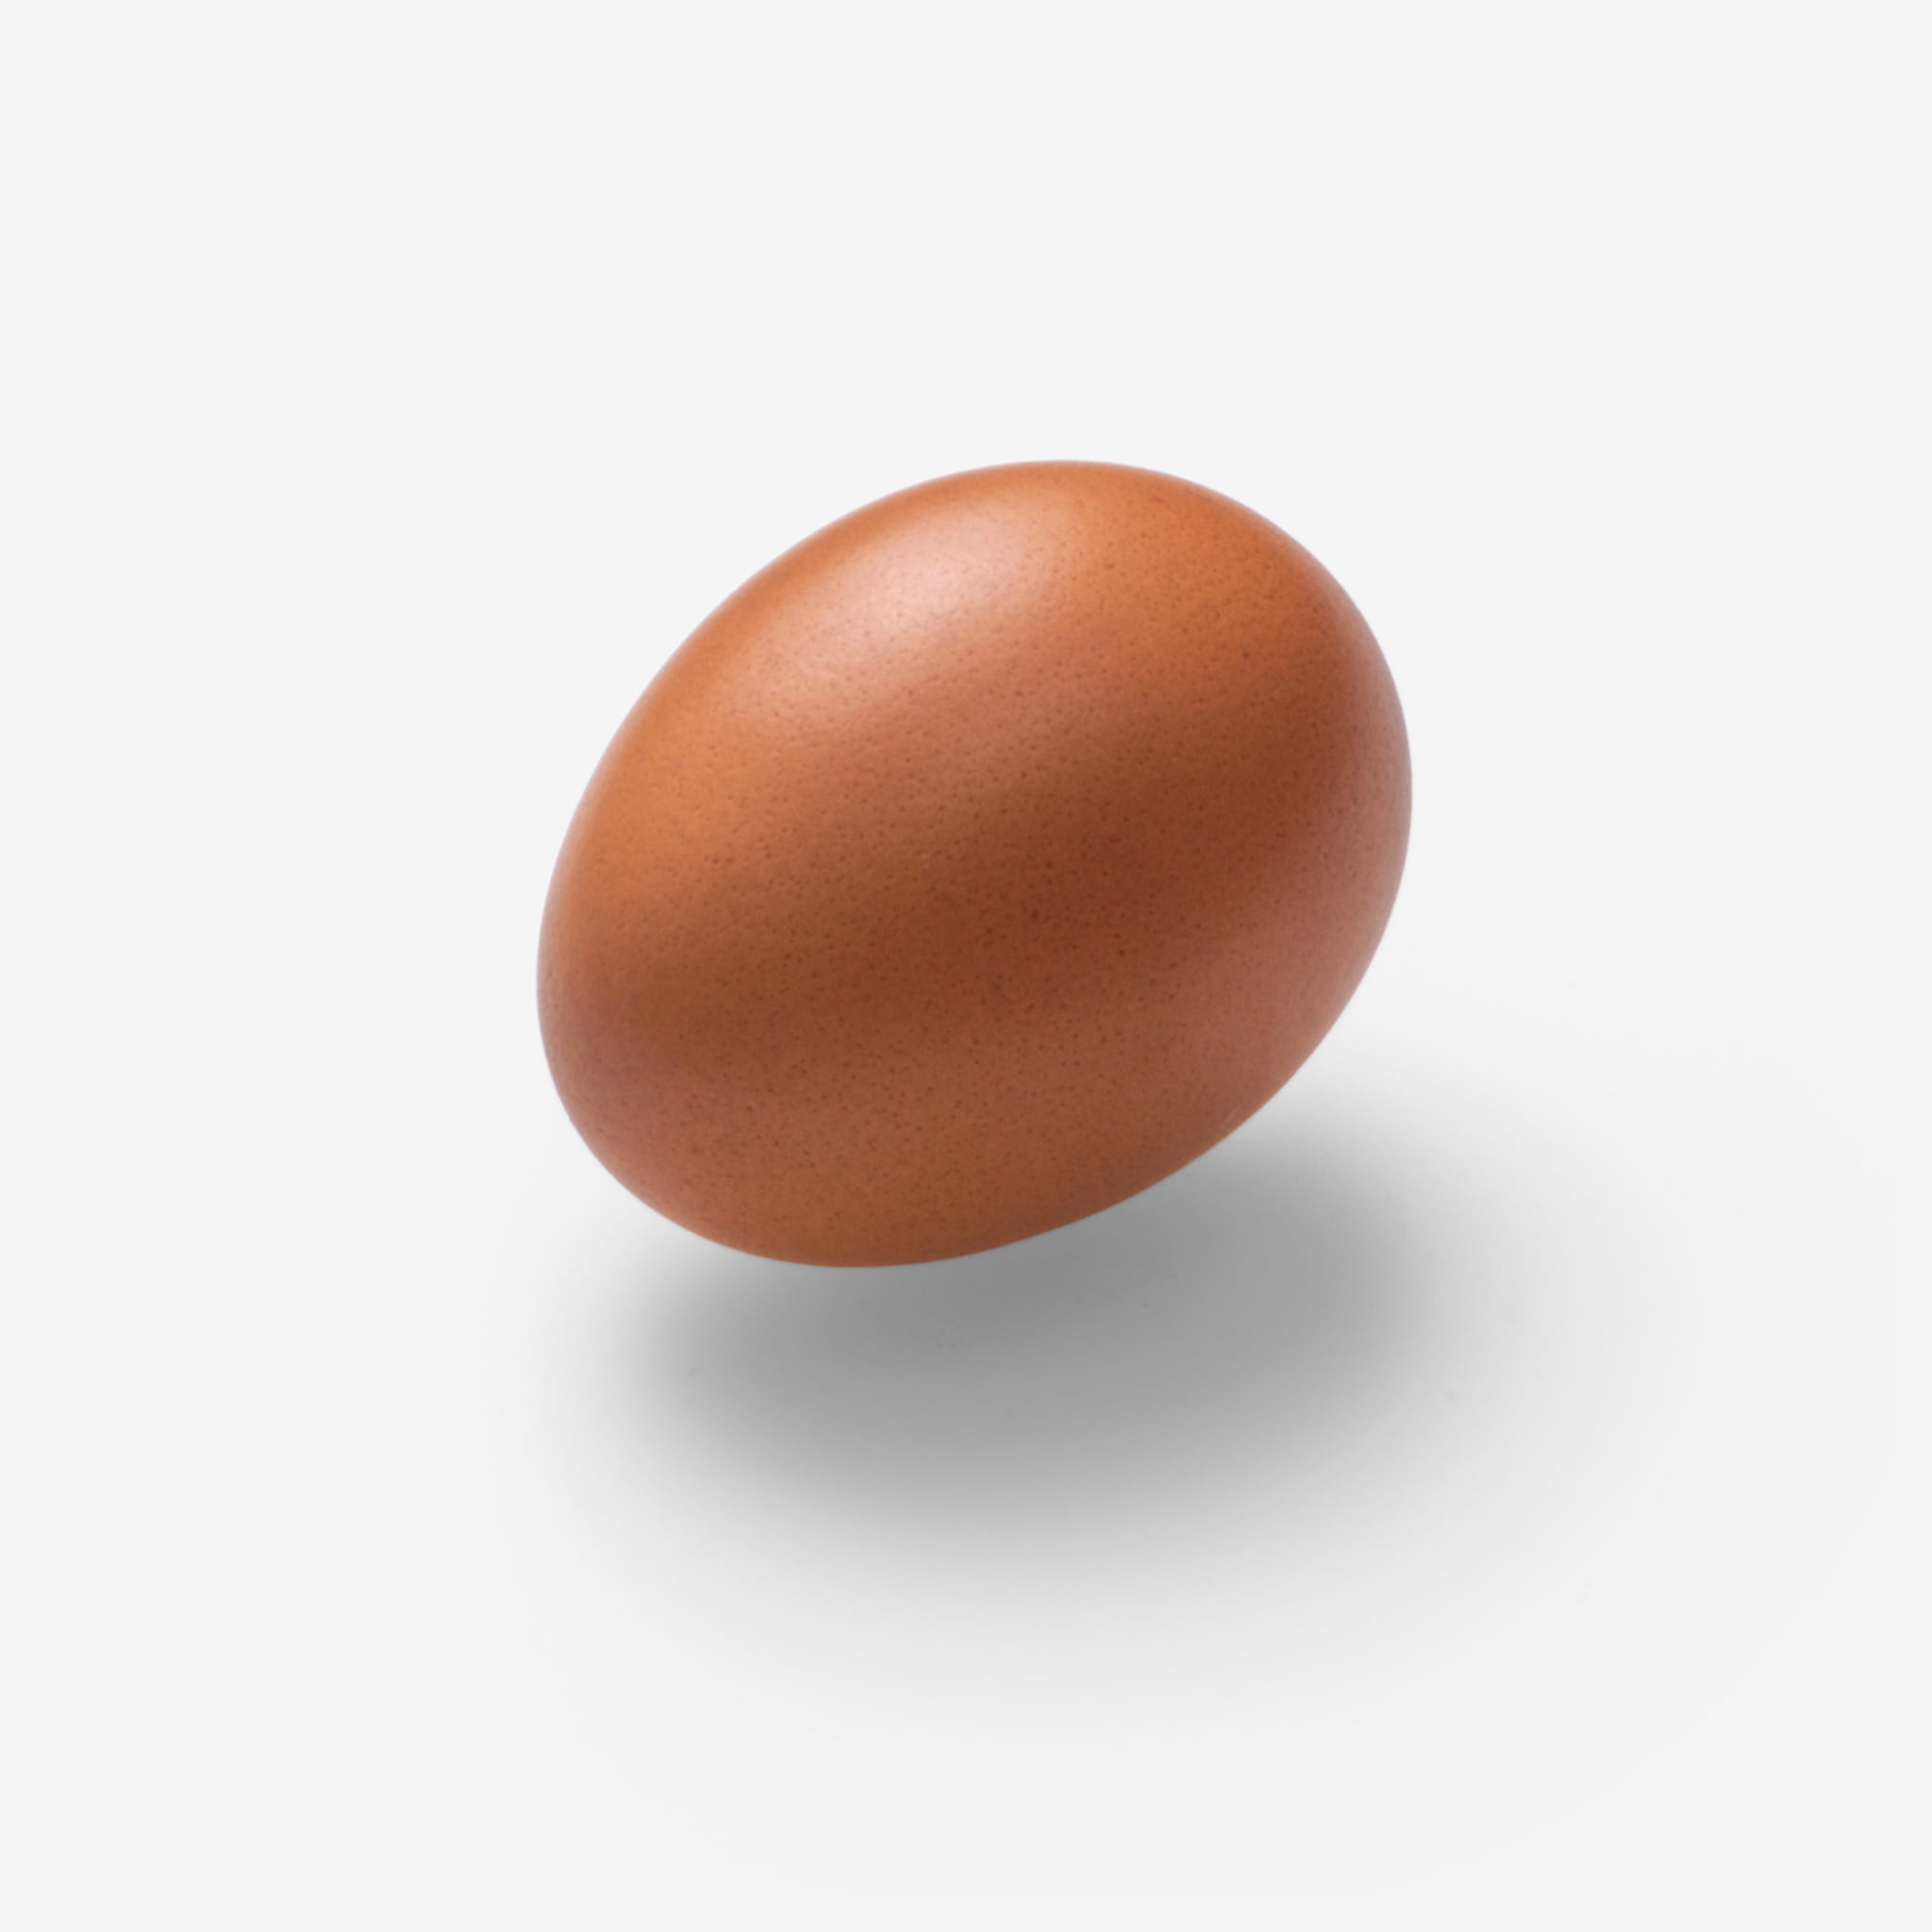 Egg PSD image with transparent background